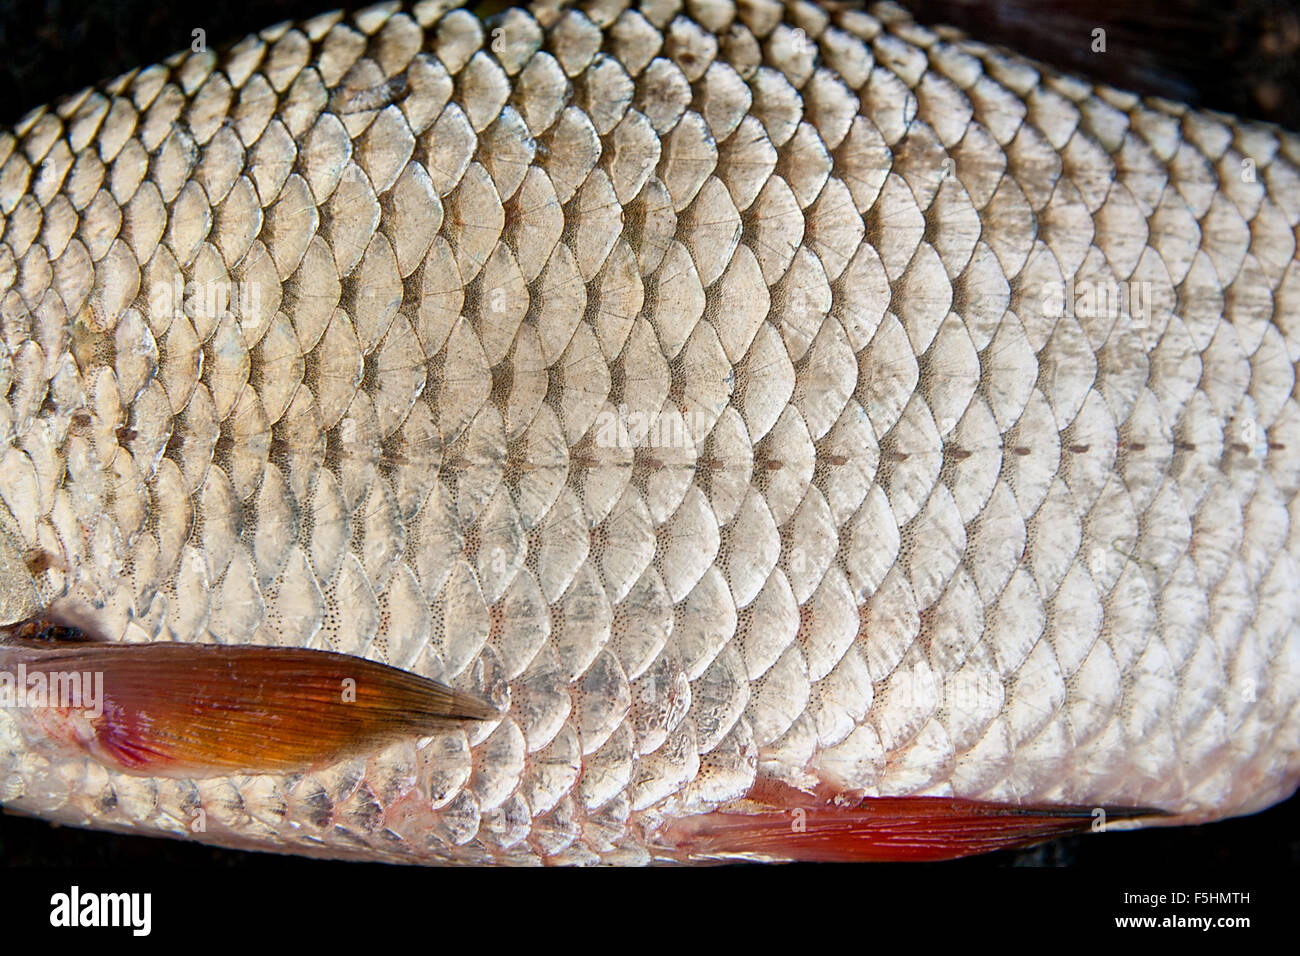 Close up view of the freshwater roach fish just taken from the water. Catching fish - common roach (Rutilus rutilus). Stock Photo